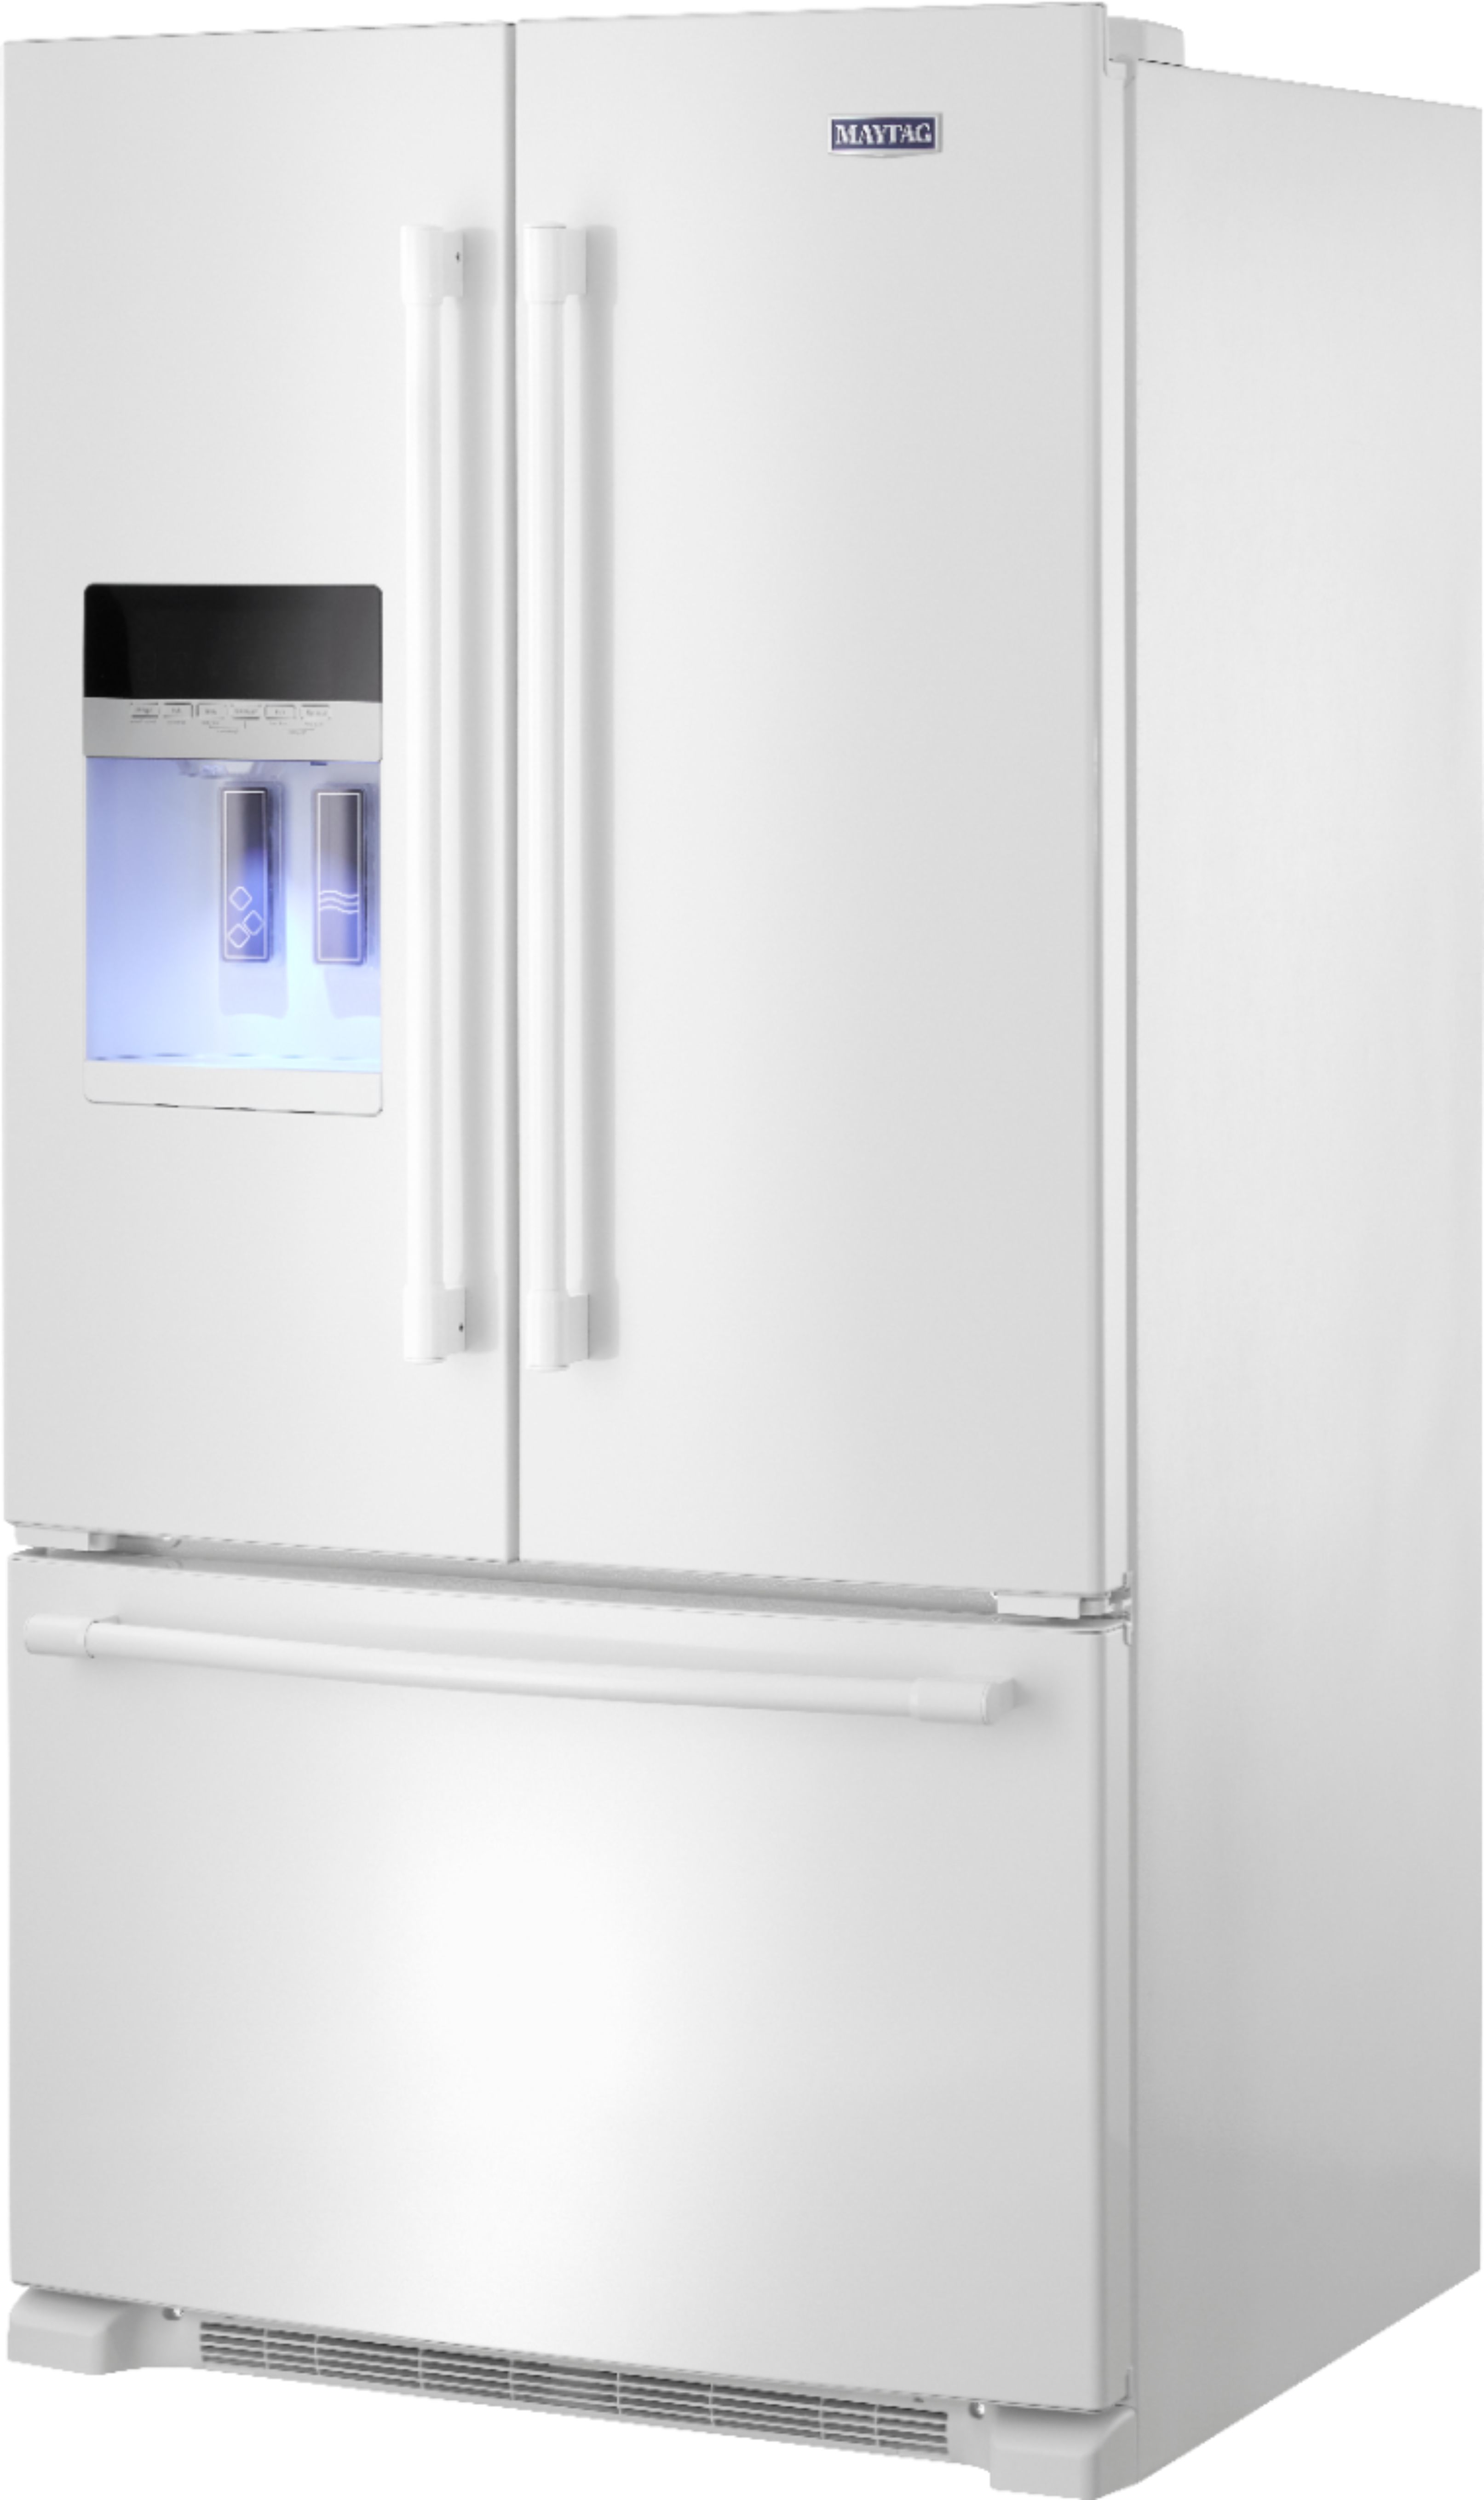 Left View: Maytag - 24.7 Cu. Ft. French Door Refrigerator - White on White